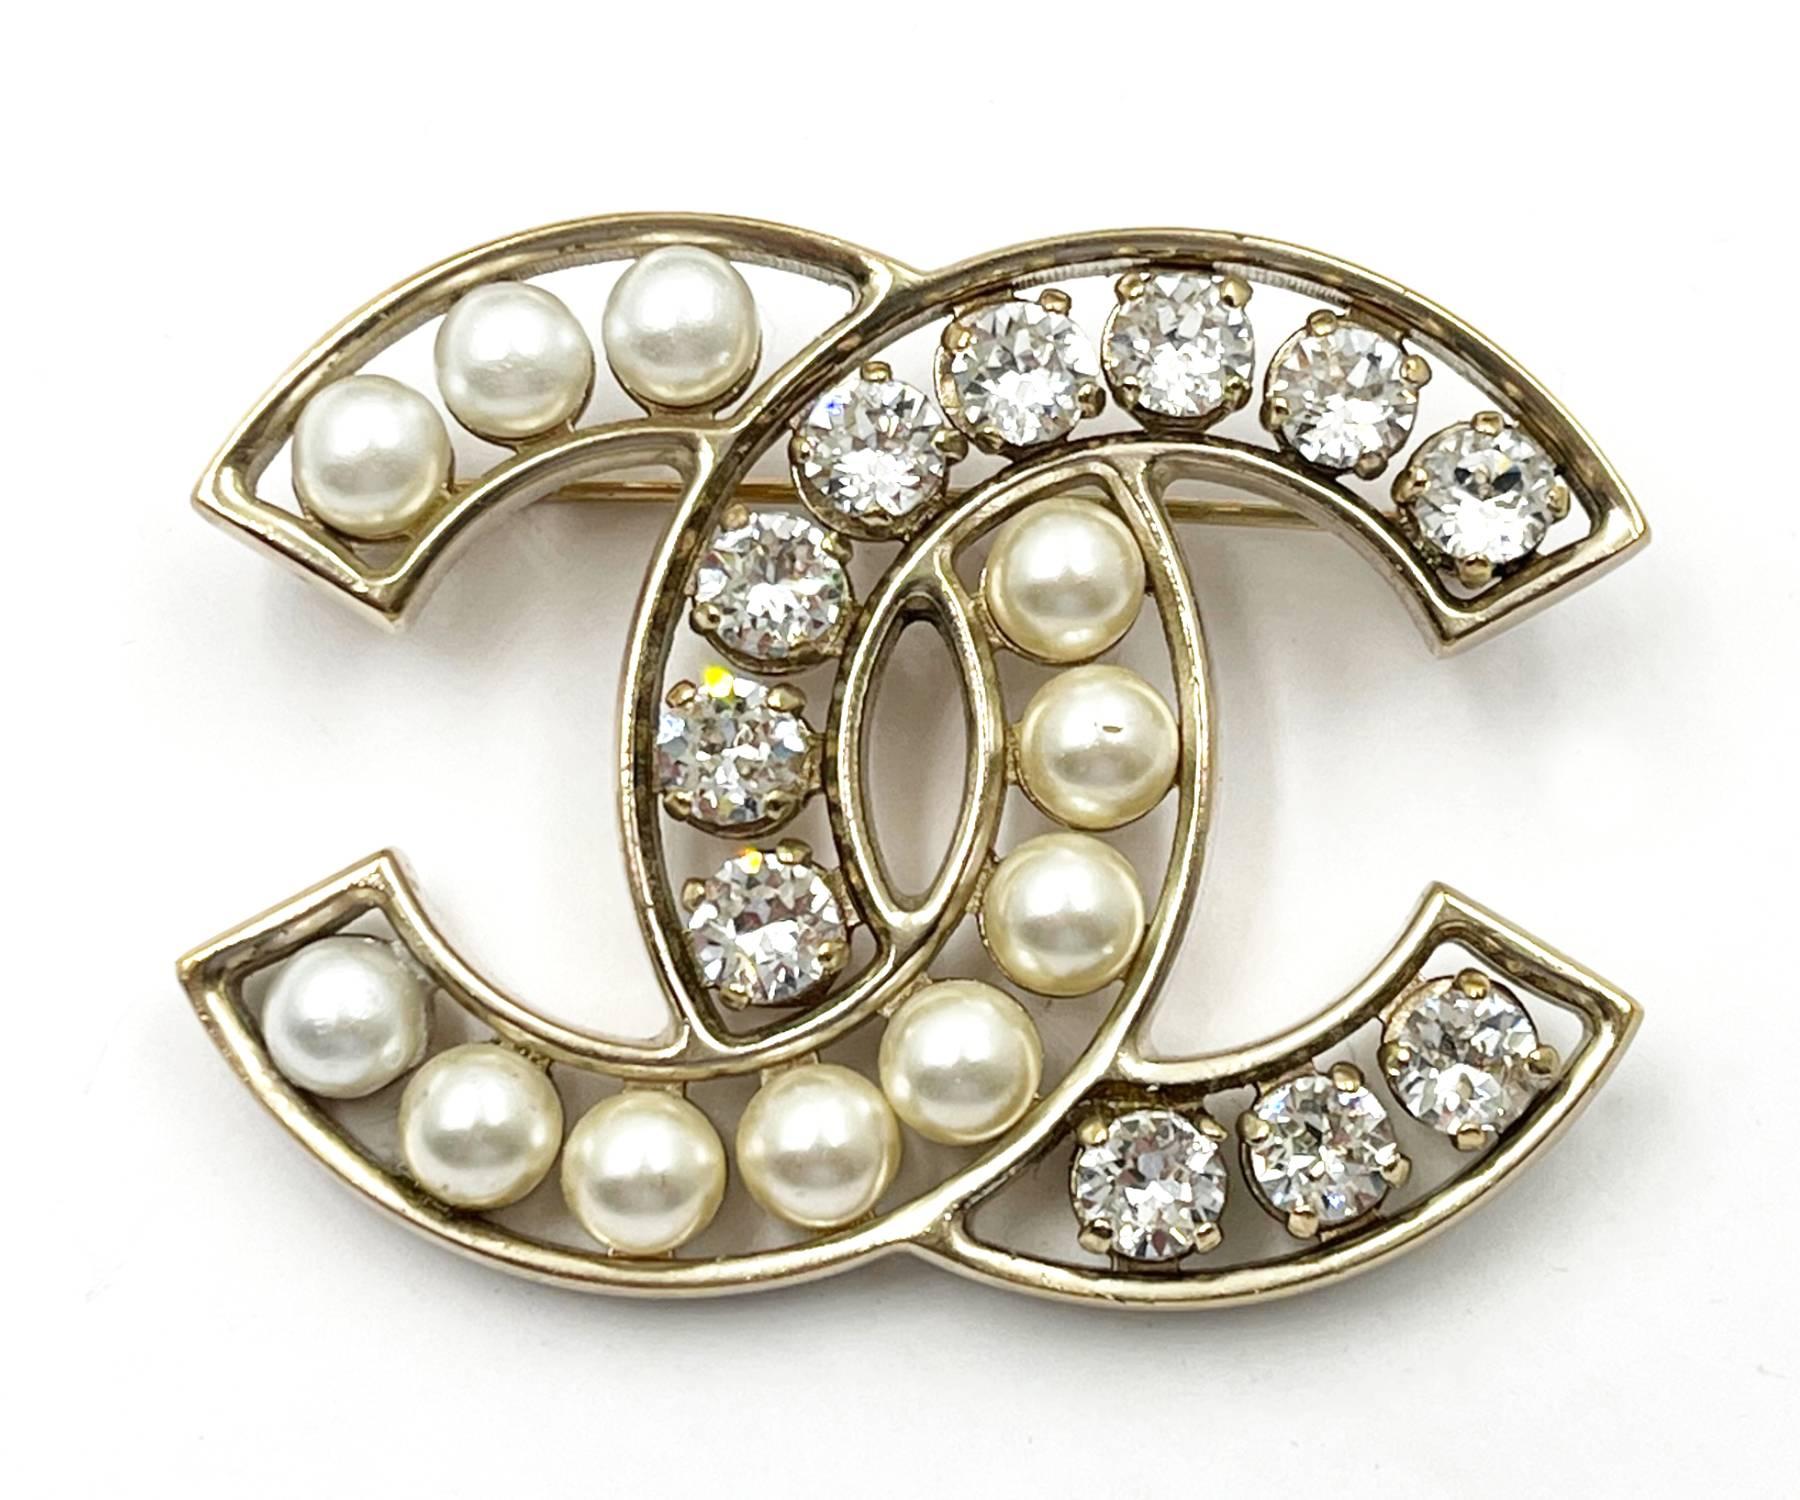 Chanel Gold Frame Pearl Crystal Large Brooch

*Marked 14
*Made in France

-Approximately 2.1″ x 1.5″.
-Very classic and beautiful
-The top 3 pearls are slightly whiter. There is a small scratch on 1 pearl.
-In a very good condition.

AB2184-00427